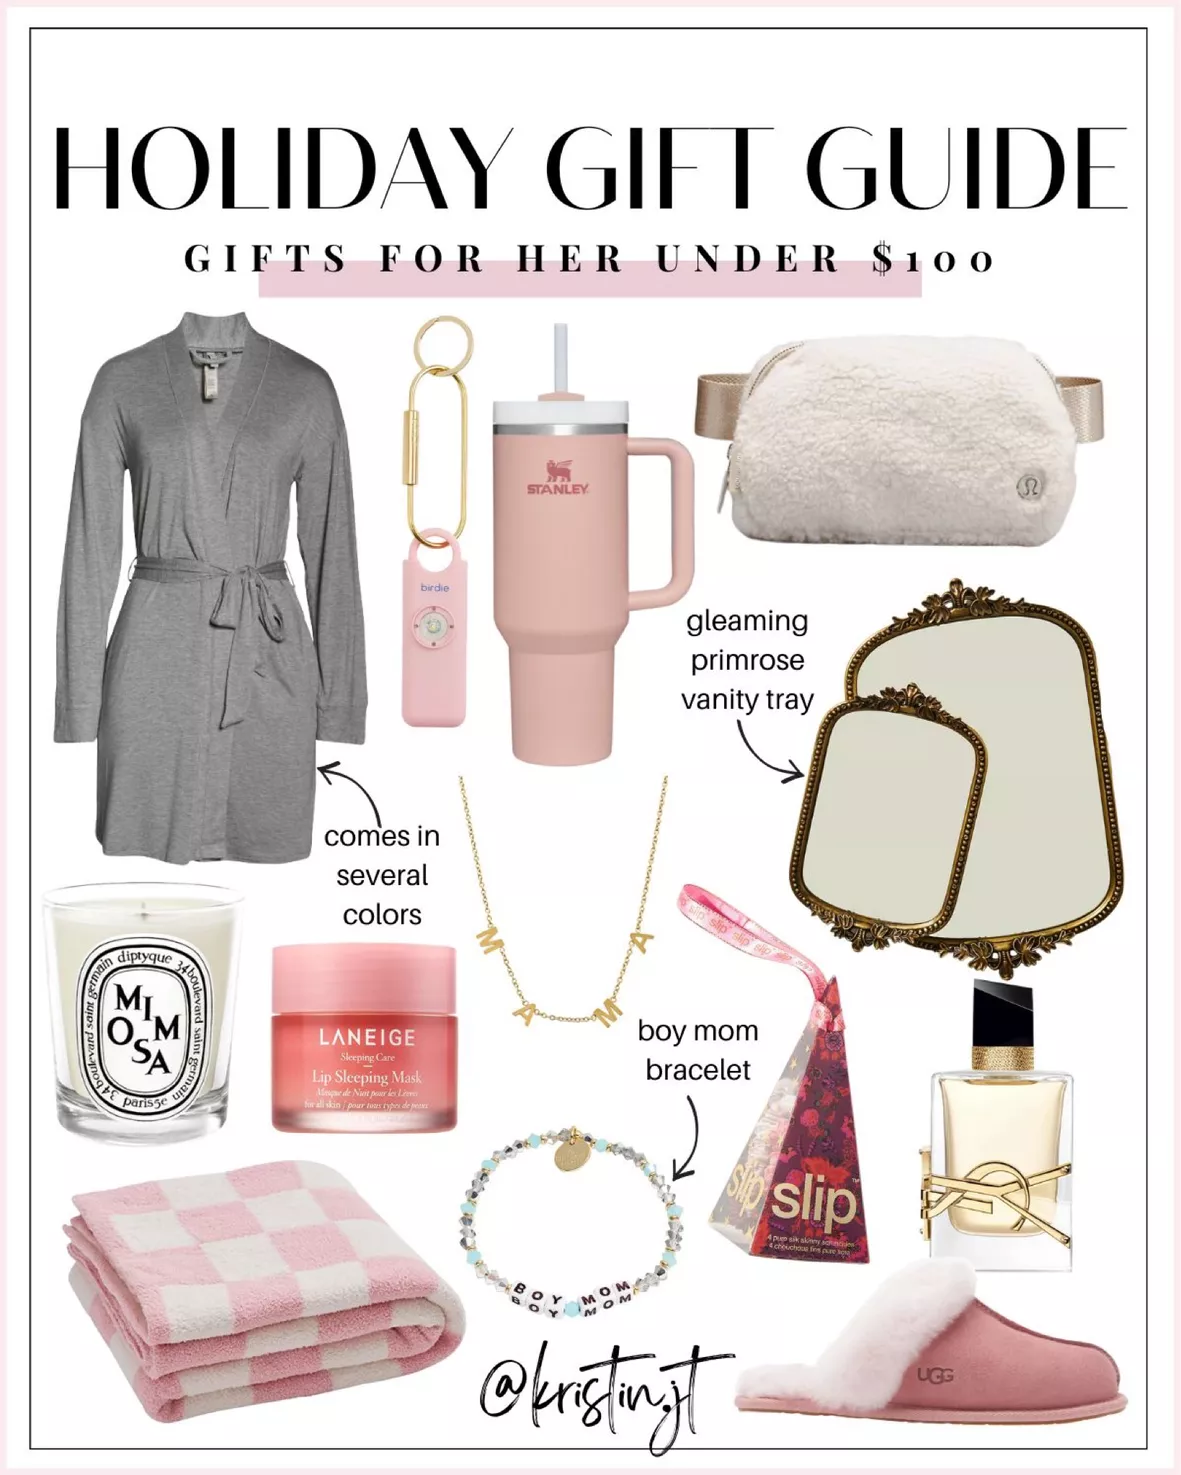 Gift Guide for Girlfriends: Under $100